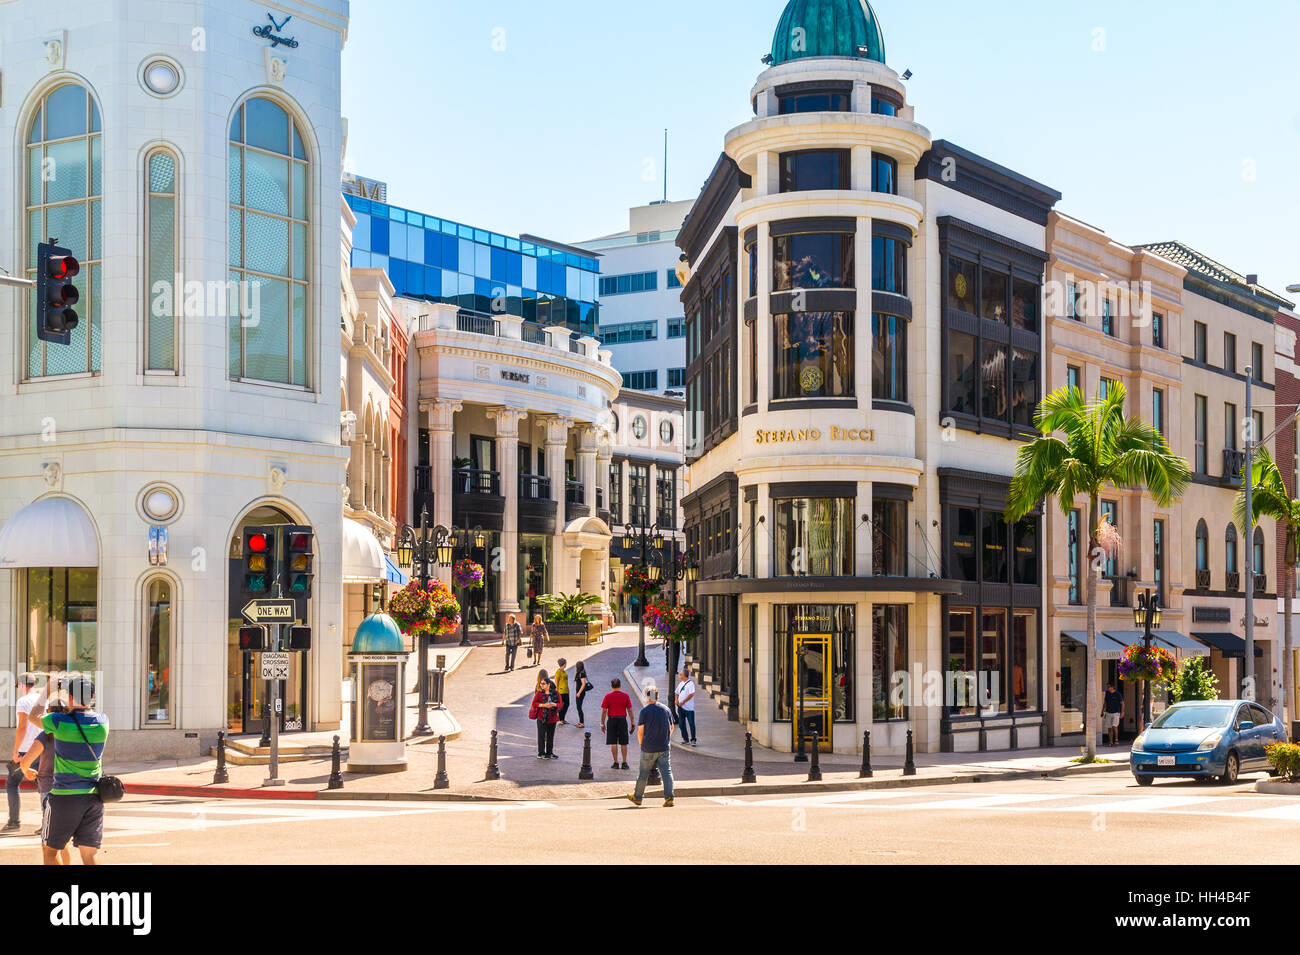 Rodeo Drive in Beverly Hills is an affluent shopping district known for ...